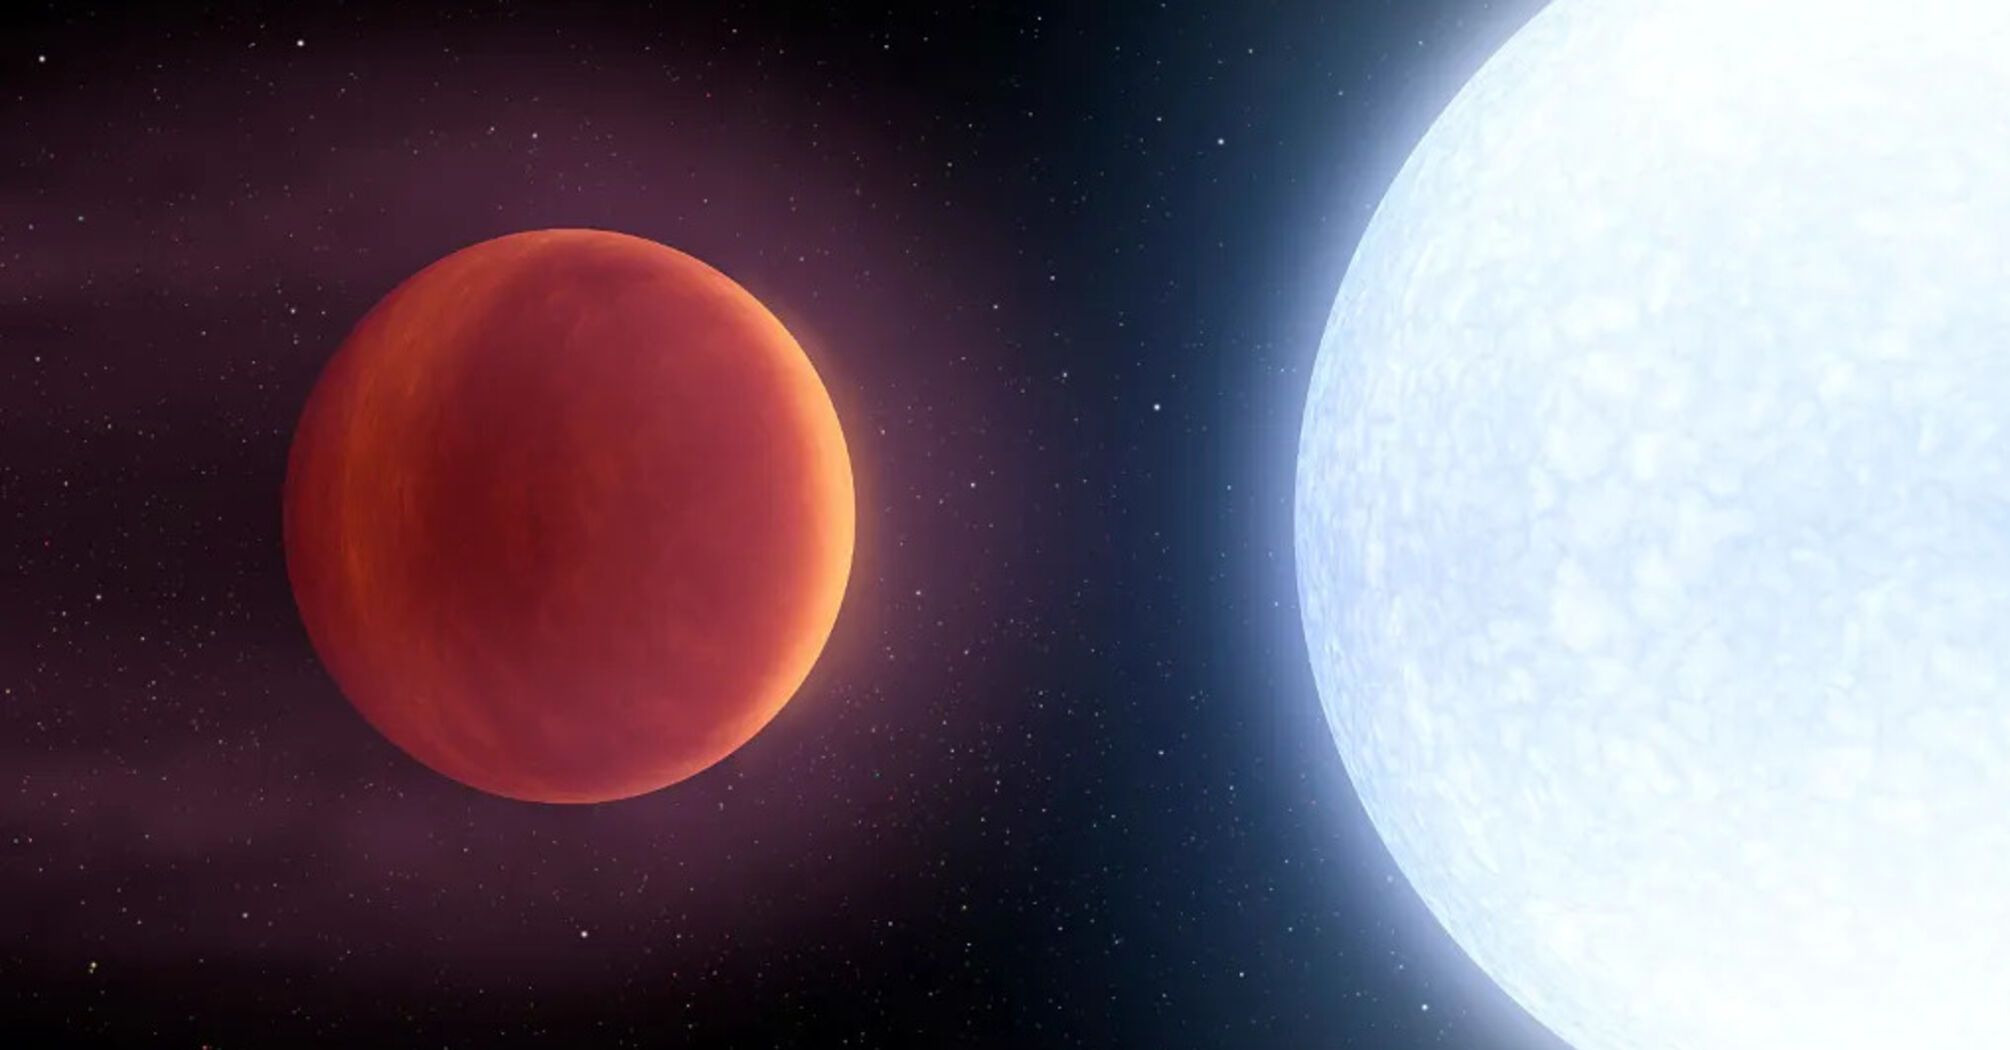 Scientists discover a very hot planet